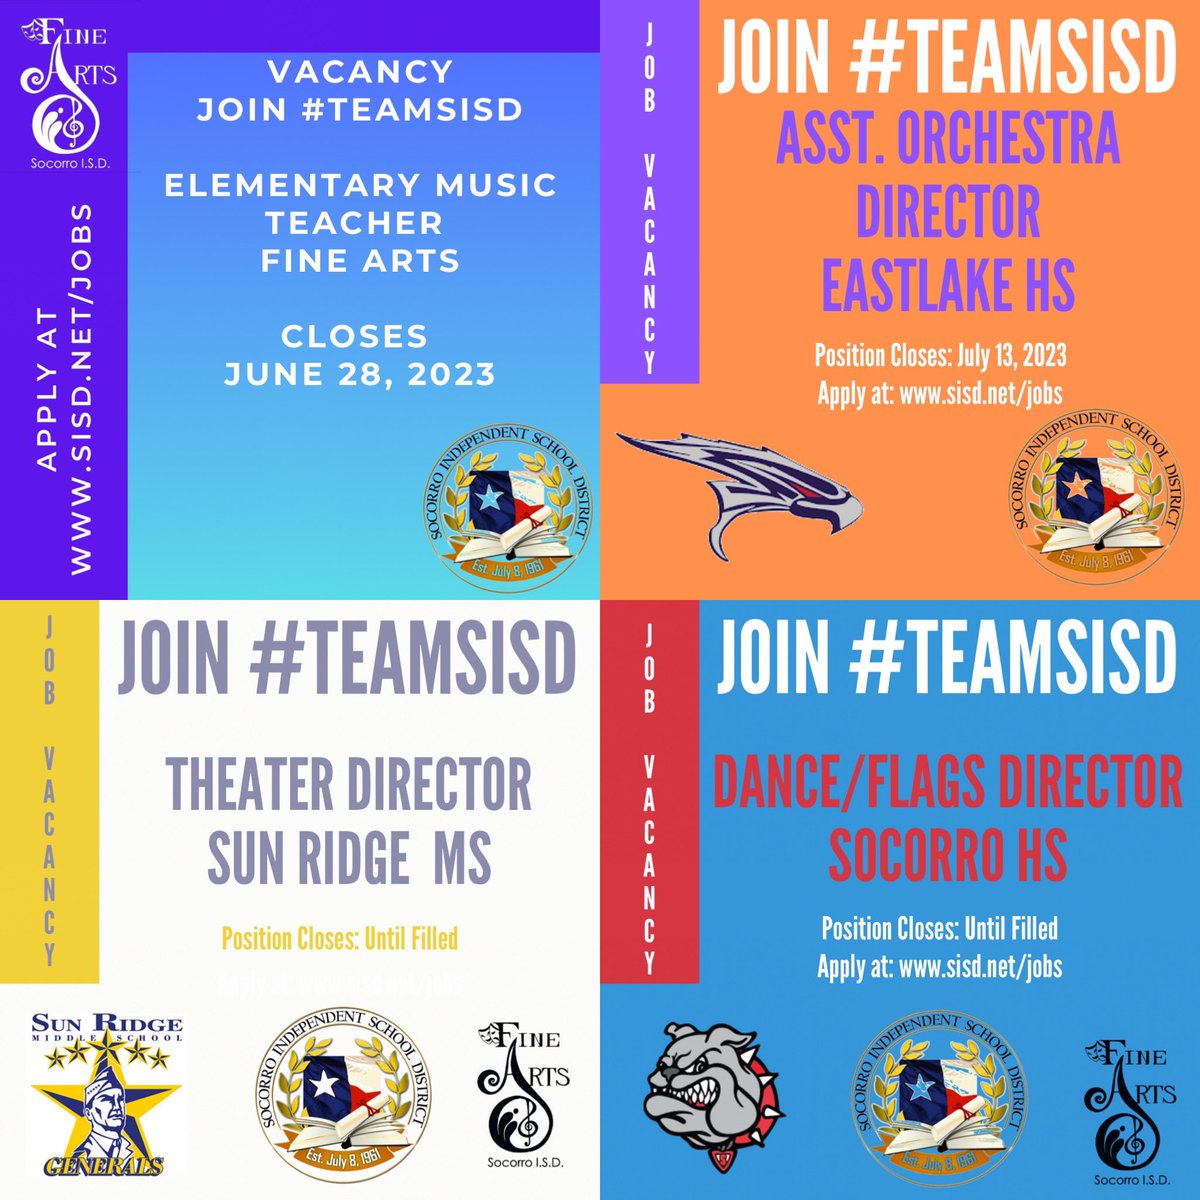 Join #TeamSISD some positions closing this week. Apply at sisd.net/jobs #SISDFineArts